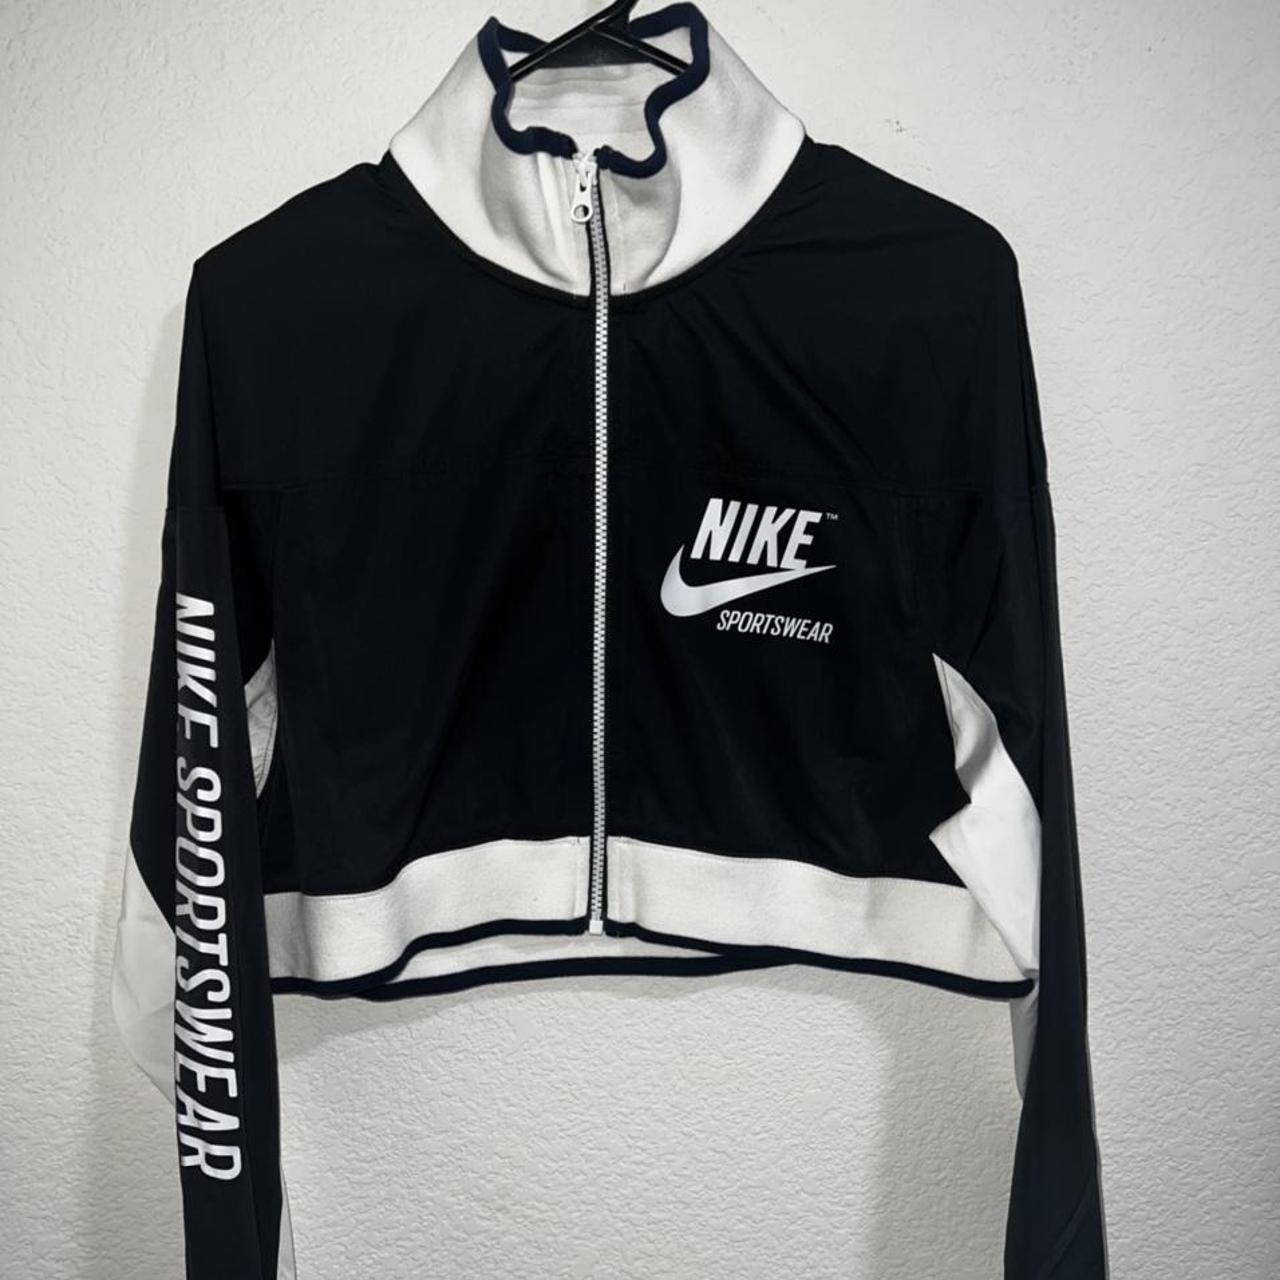 Brand new WINDBREAKER, never worn. Was gifted but...